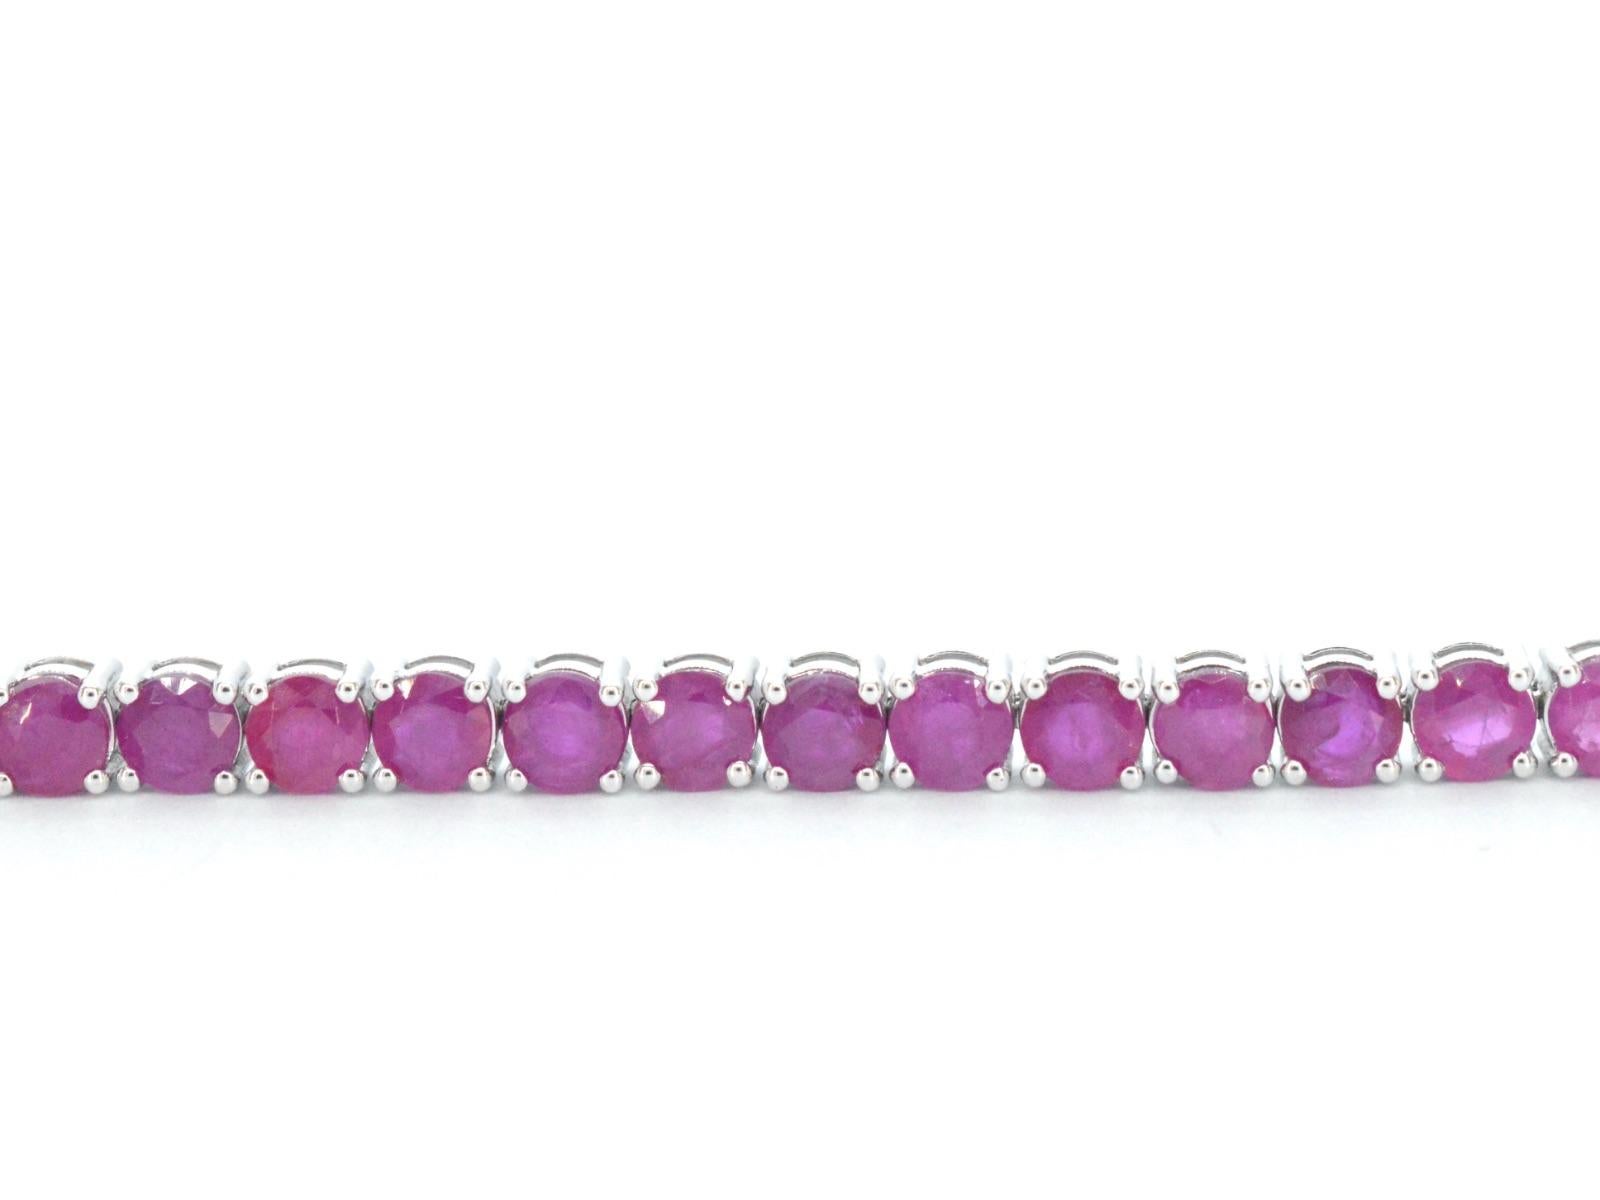 Brilliant Cut White Gold Tennis Bracelet with Rubies For Sale